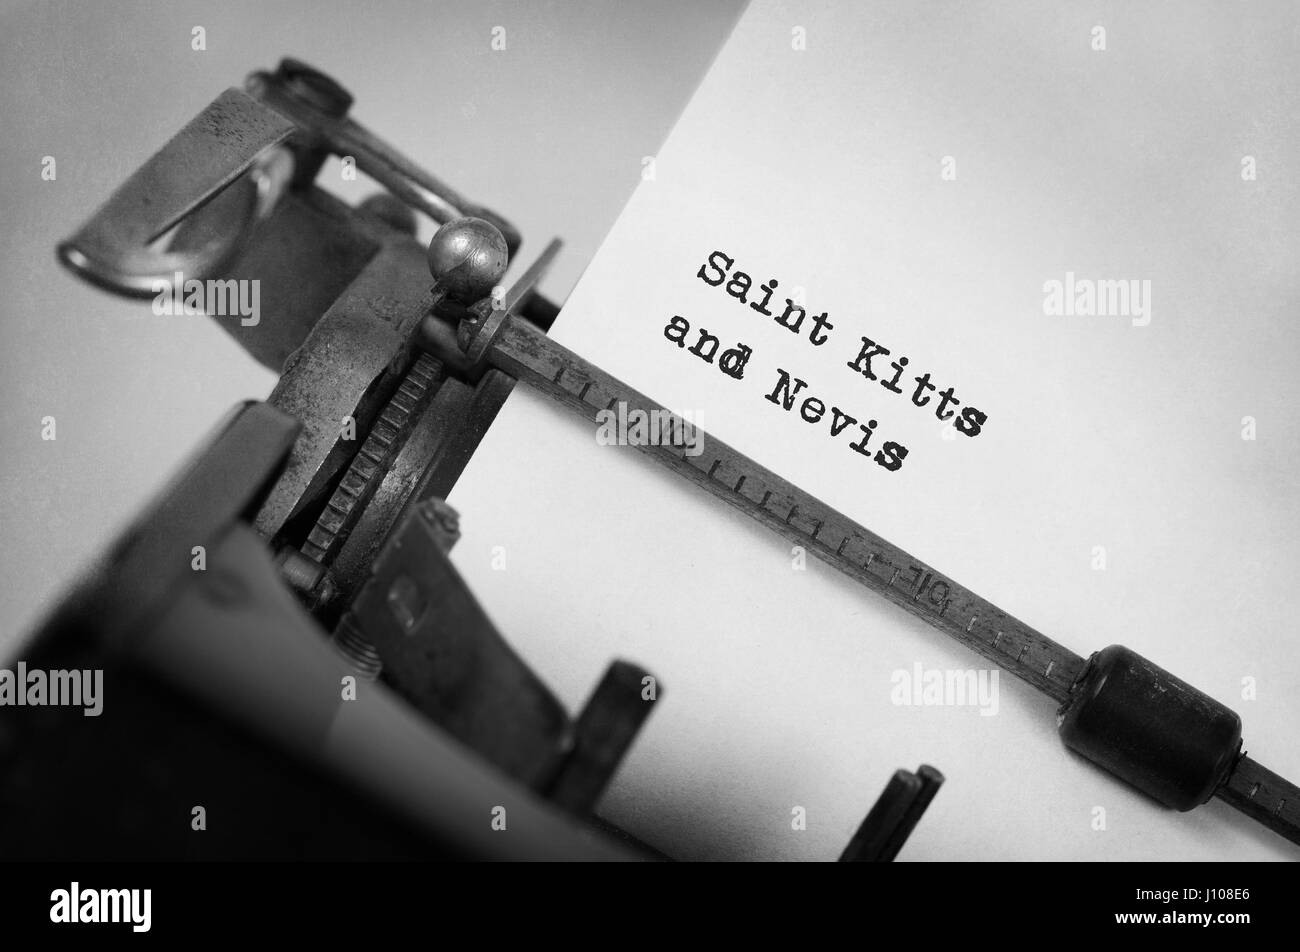 Inscription made by vintage typewriter, country, Saint Kitts and Nevis Stock Photo